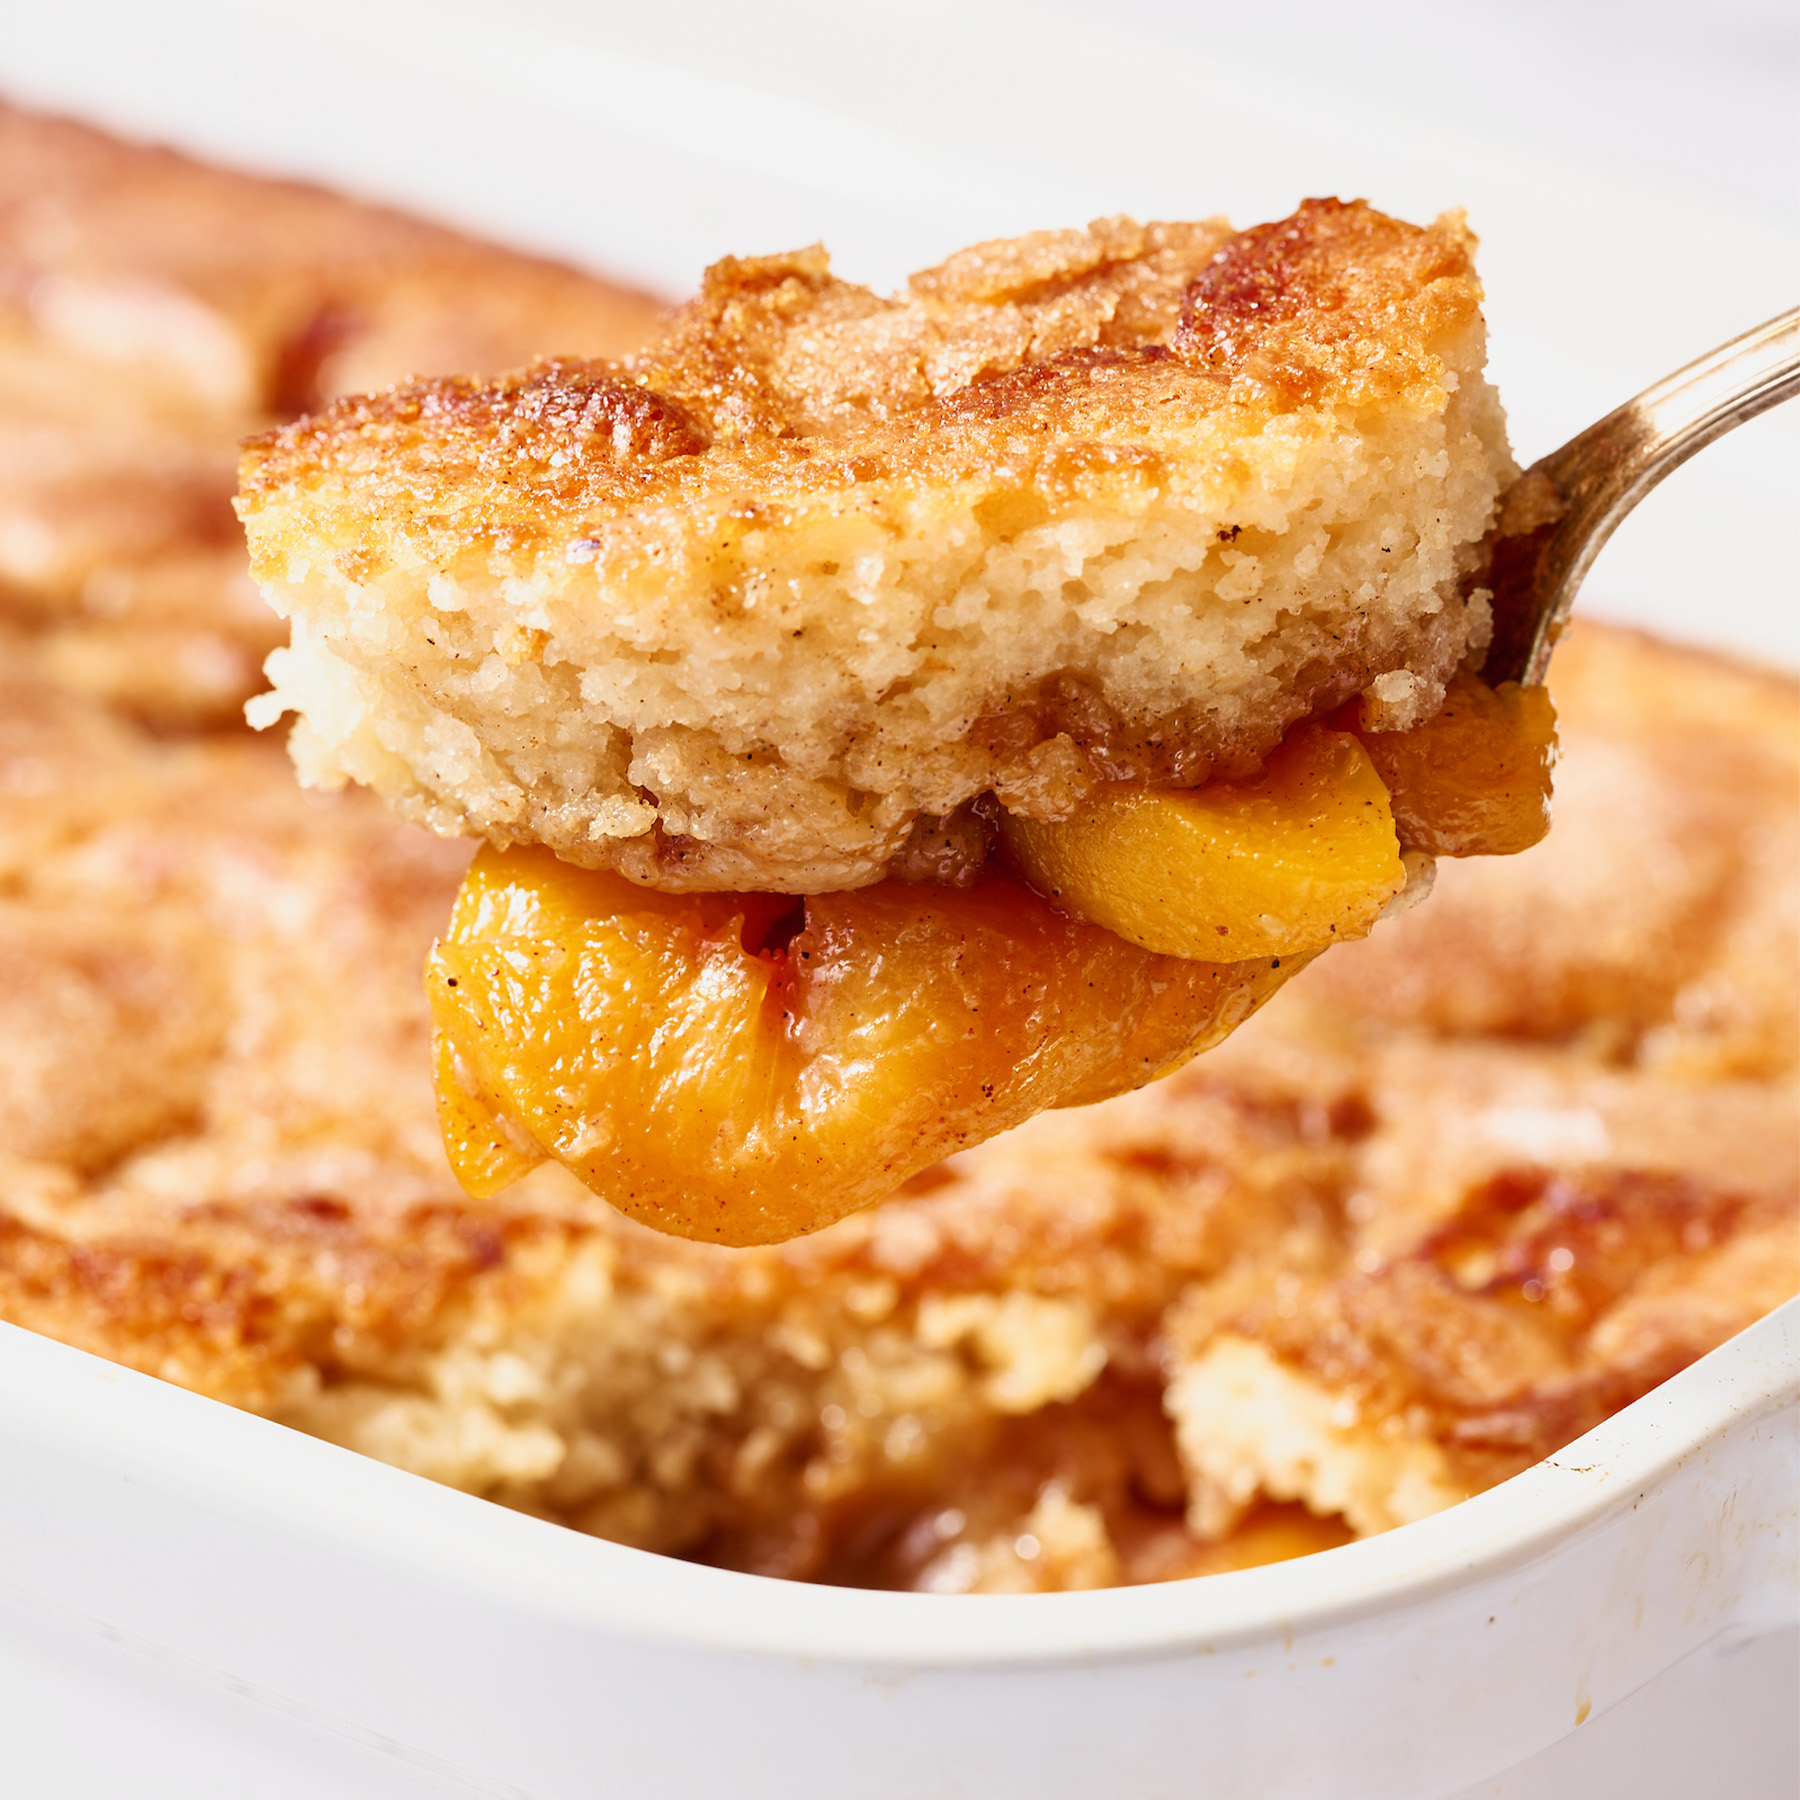 spoon lifting peach cobbler from baking dish